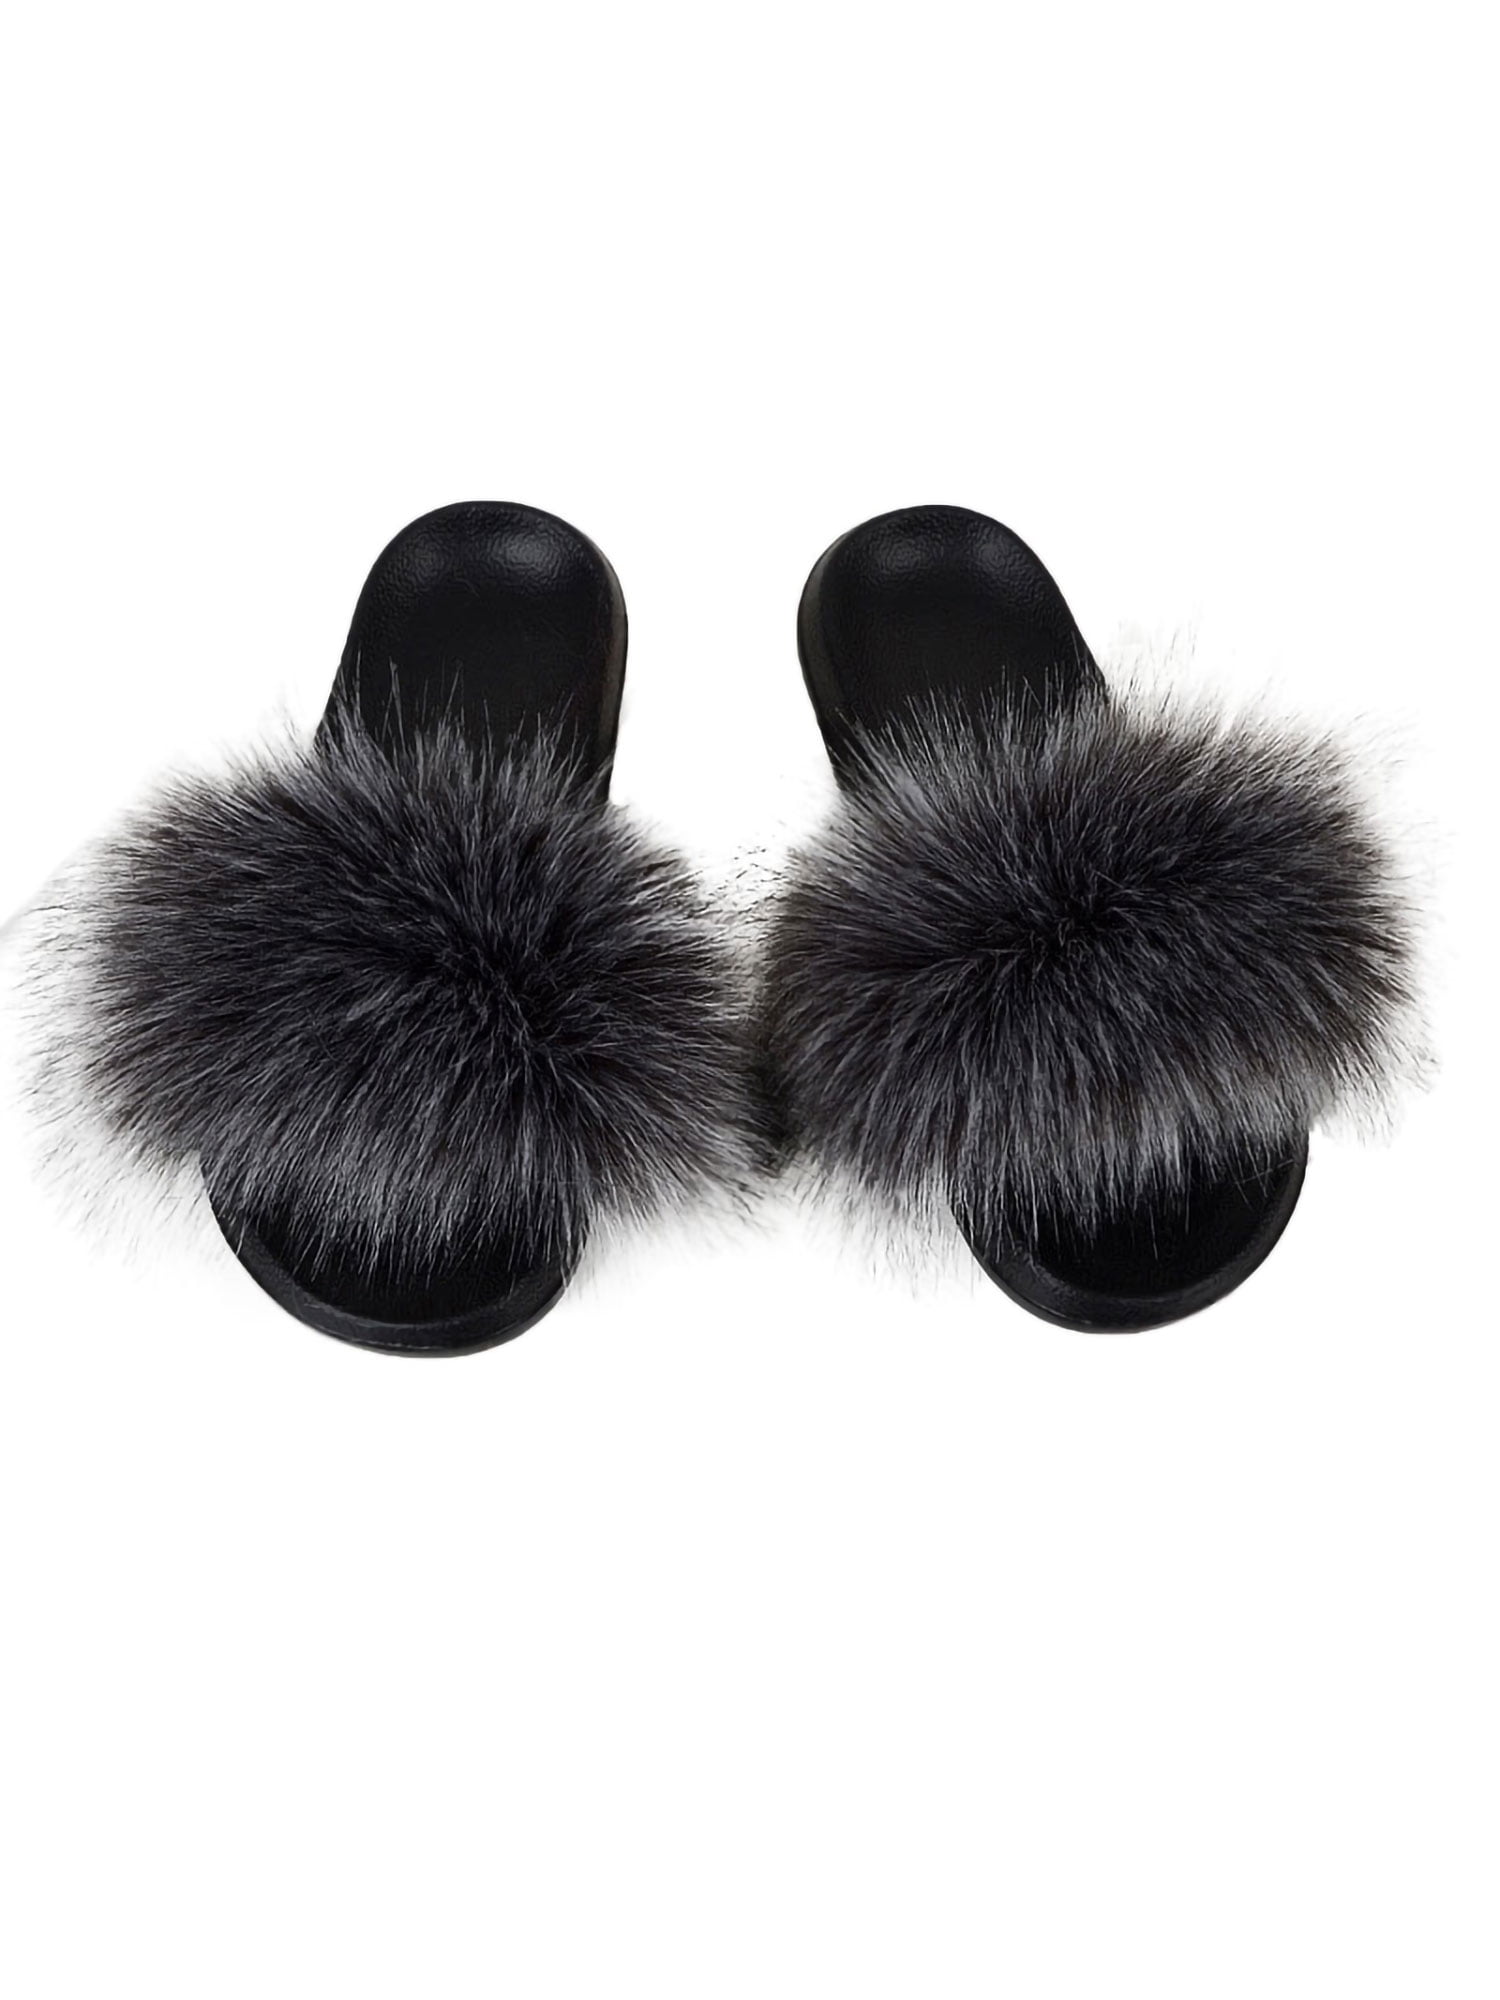 Details about   Furry Winter Flat Slippers Fluffy Plush Ladies Sandals Footwear Solid Flip Flops